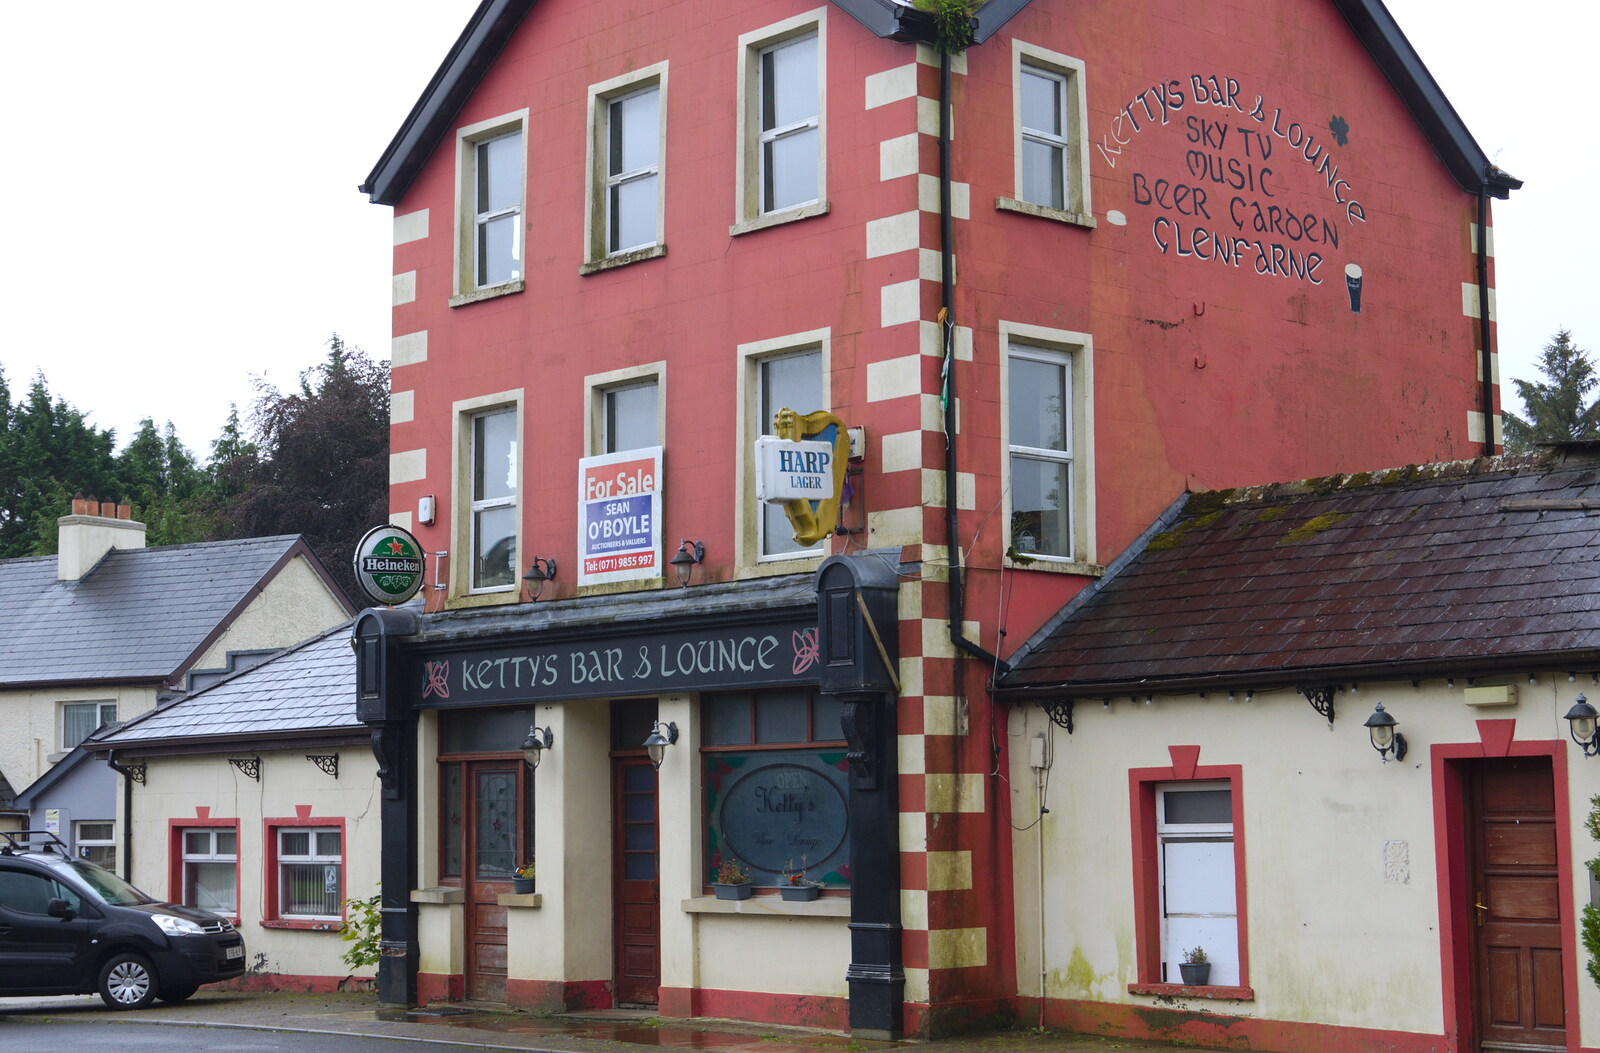 The closed-down Ketty's Bar and Lounge from Travels in the Borderlands: An Blaic/Blacklion to Belcoo and back, Cavan and Fermanagh, Ireland - 22nd August 2019